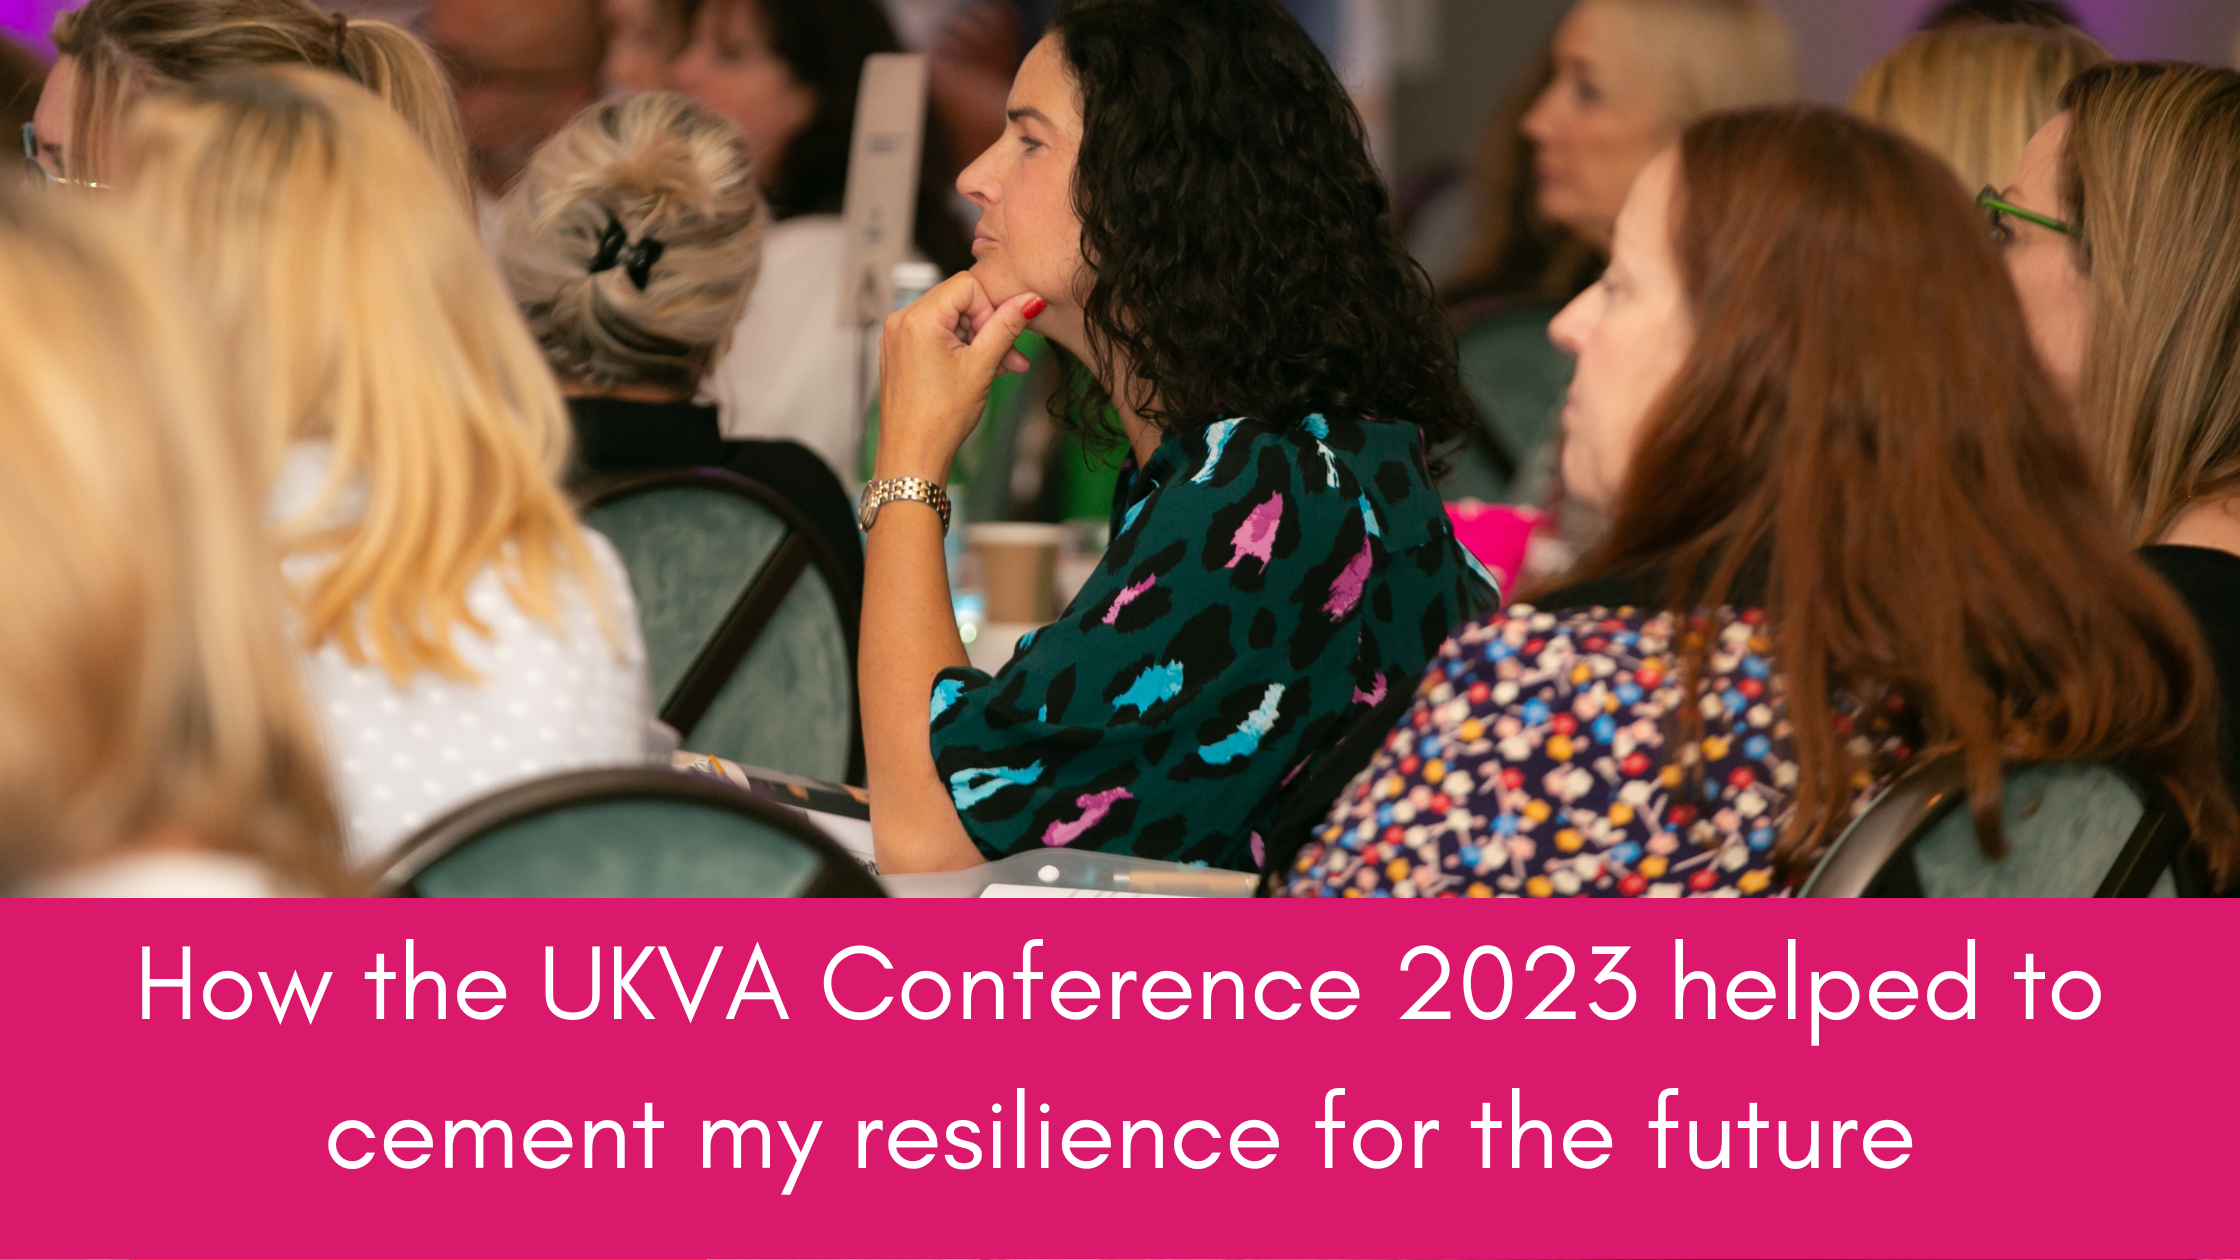 How the UK VA Conference 2023 helped to cement my resilience for the future